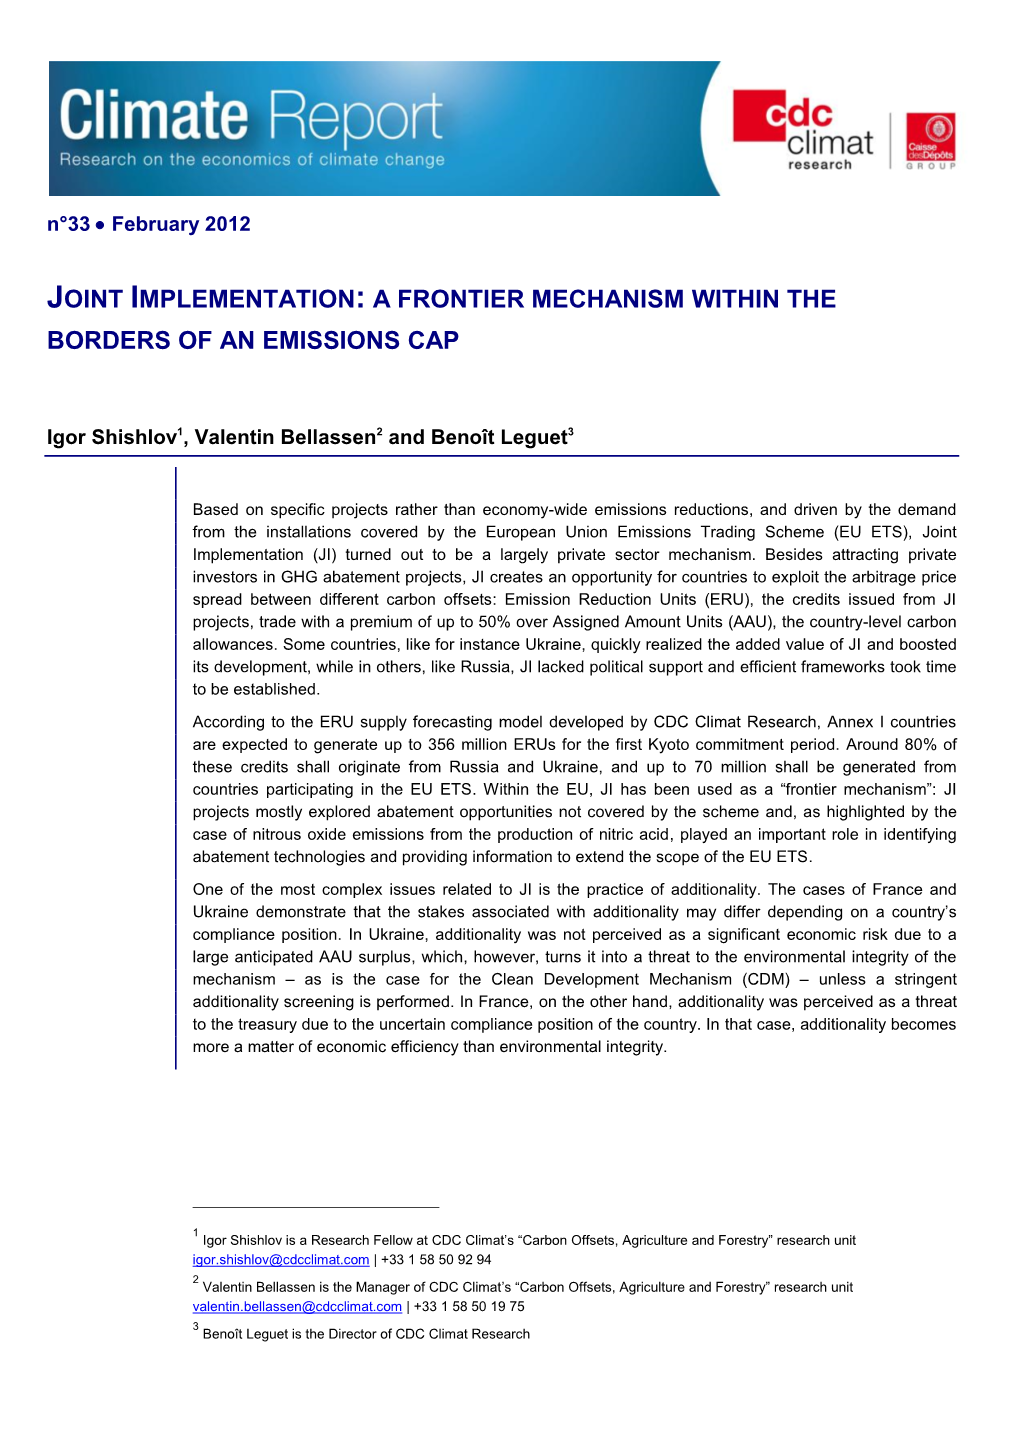 Joint Implementation: a Frontier Mechanism Within the Borders of an Emissions Cap